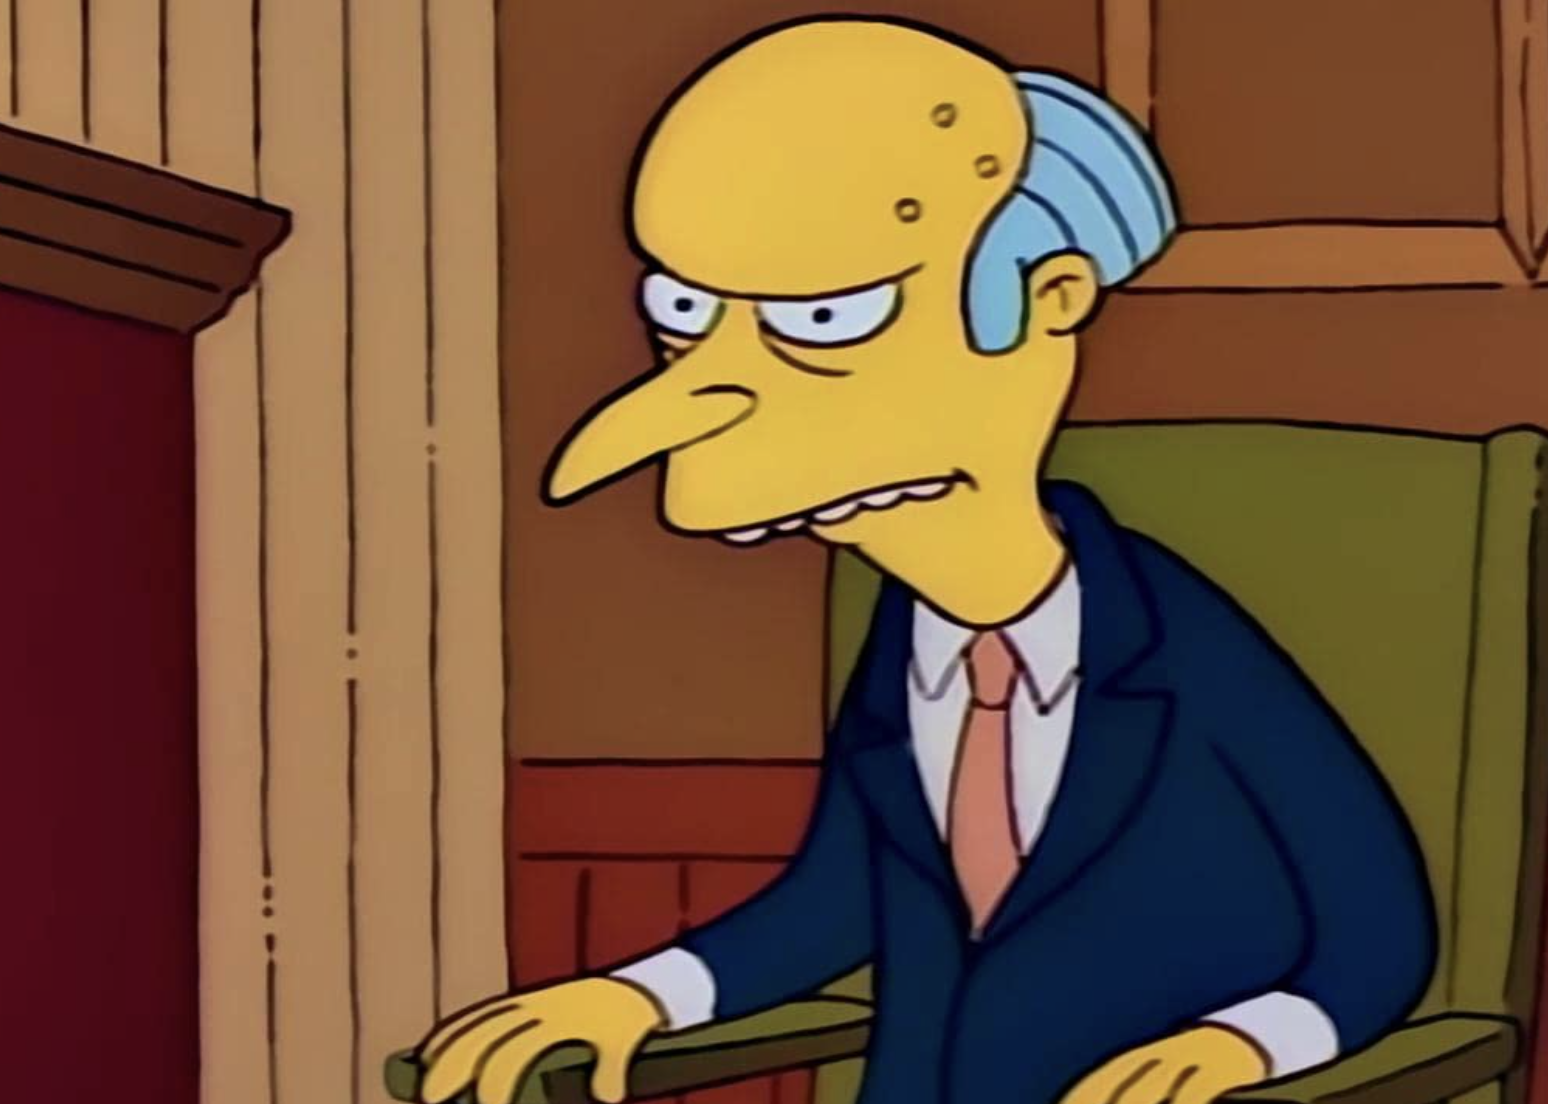 Harry Shearer's character in The Simpsons